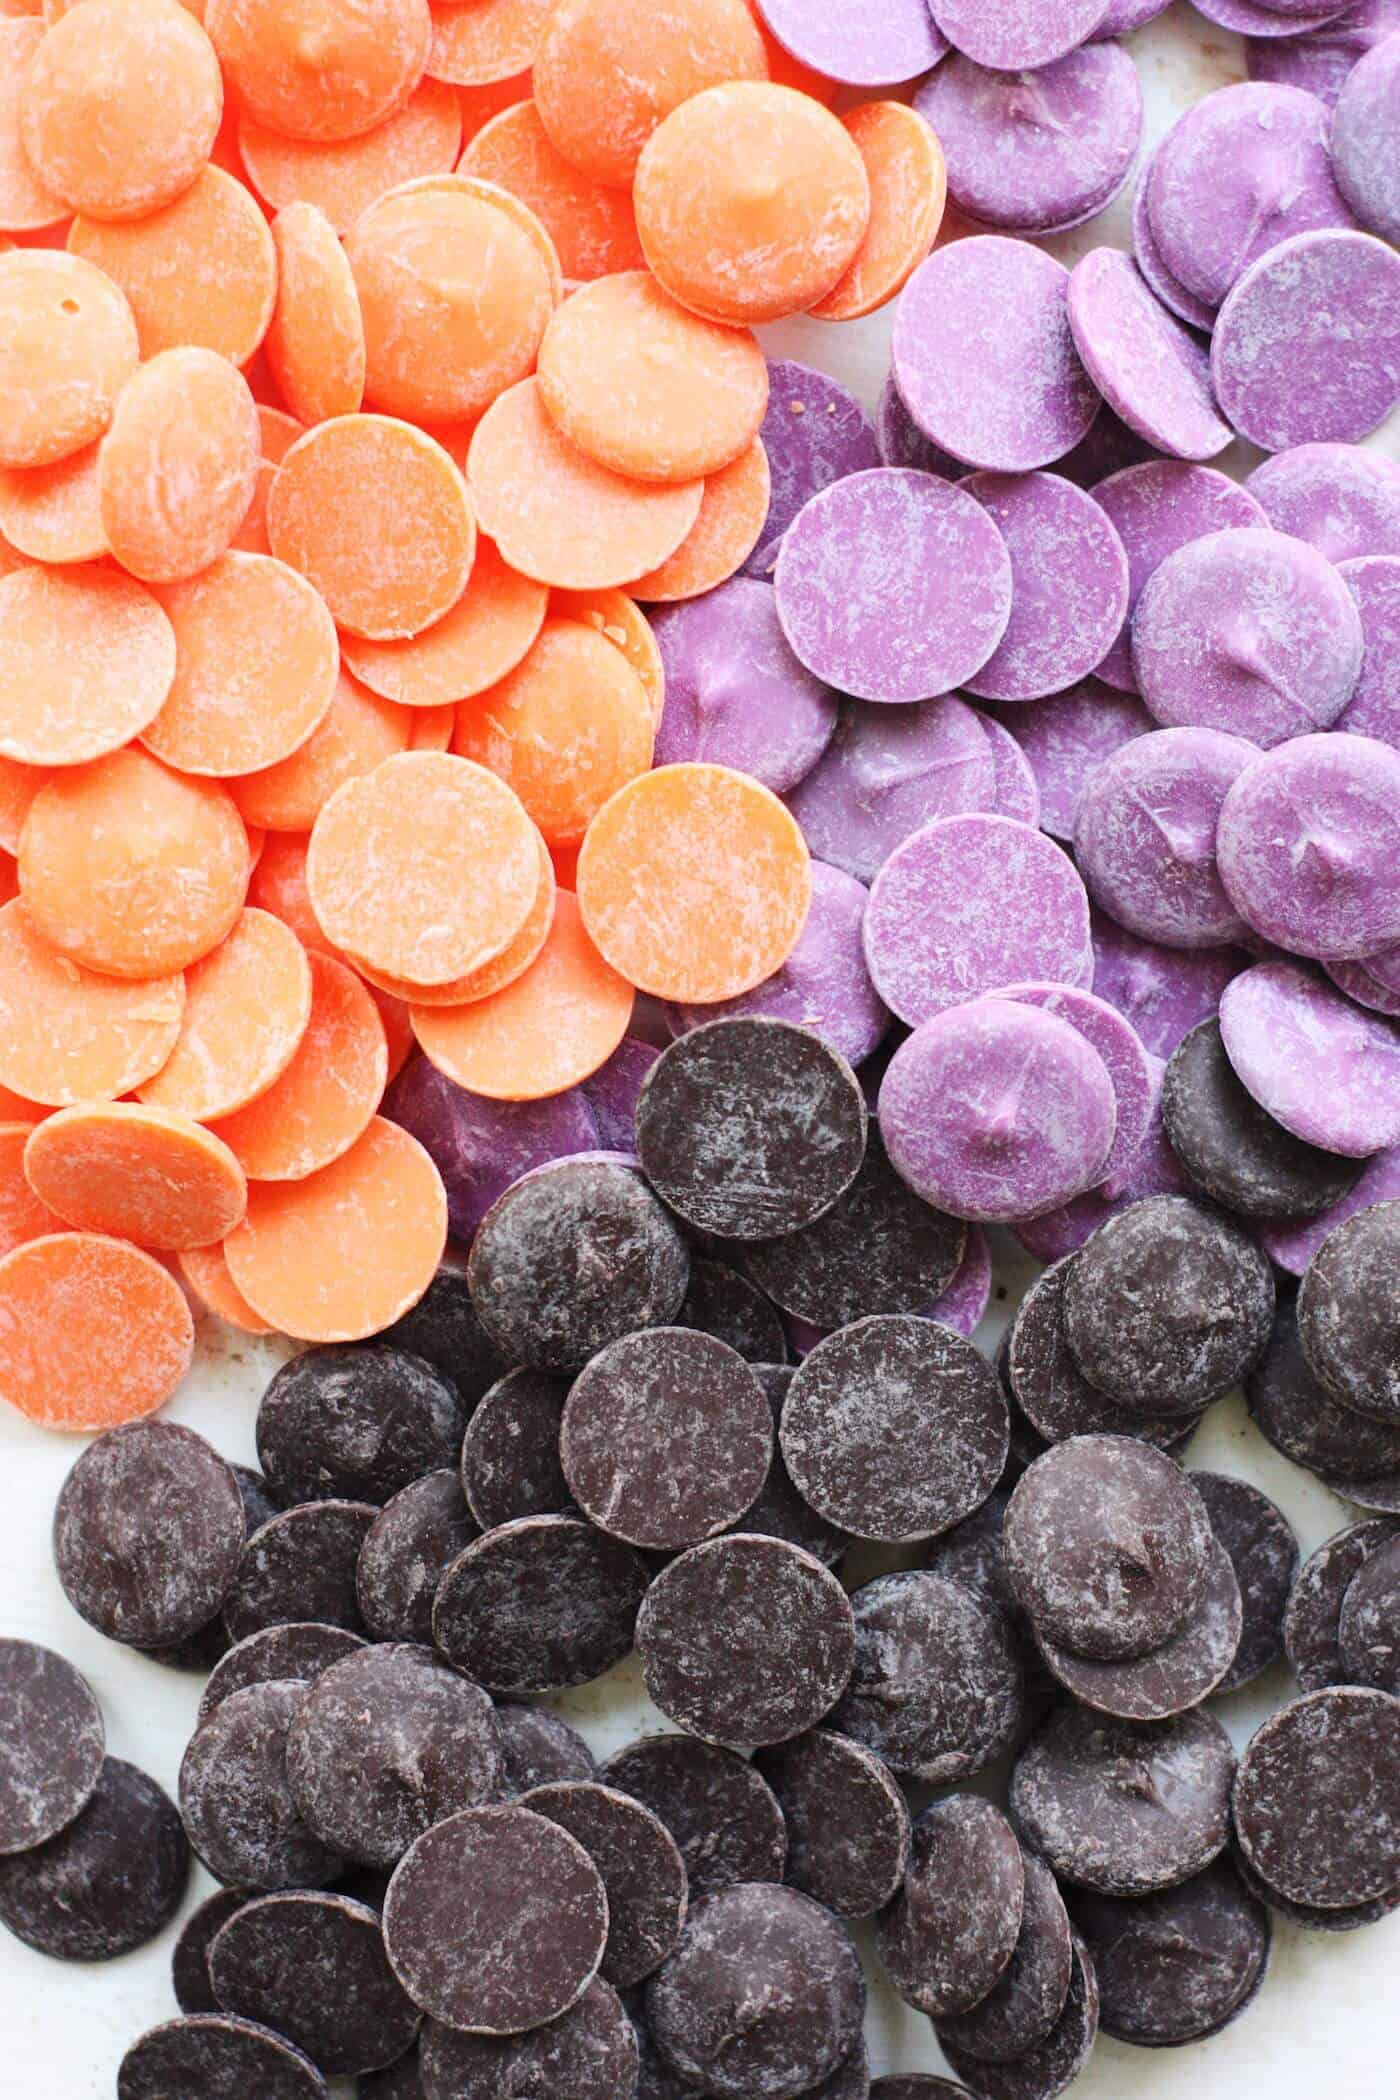 Wilton candy melts in orange, purple, and black for Halloween